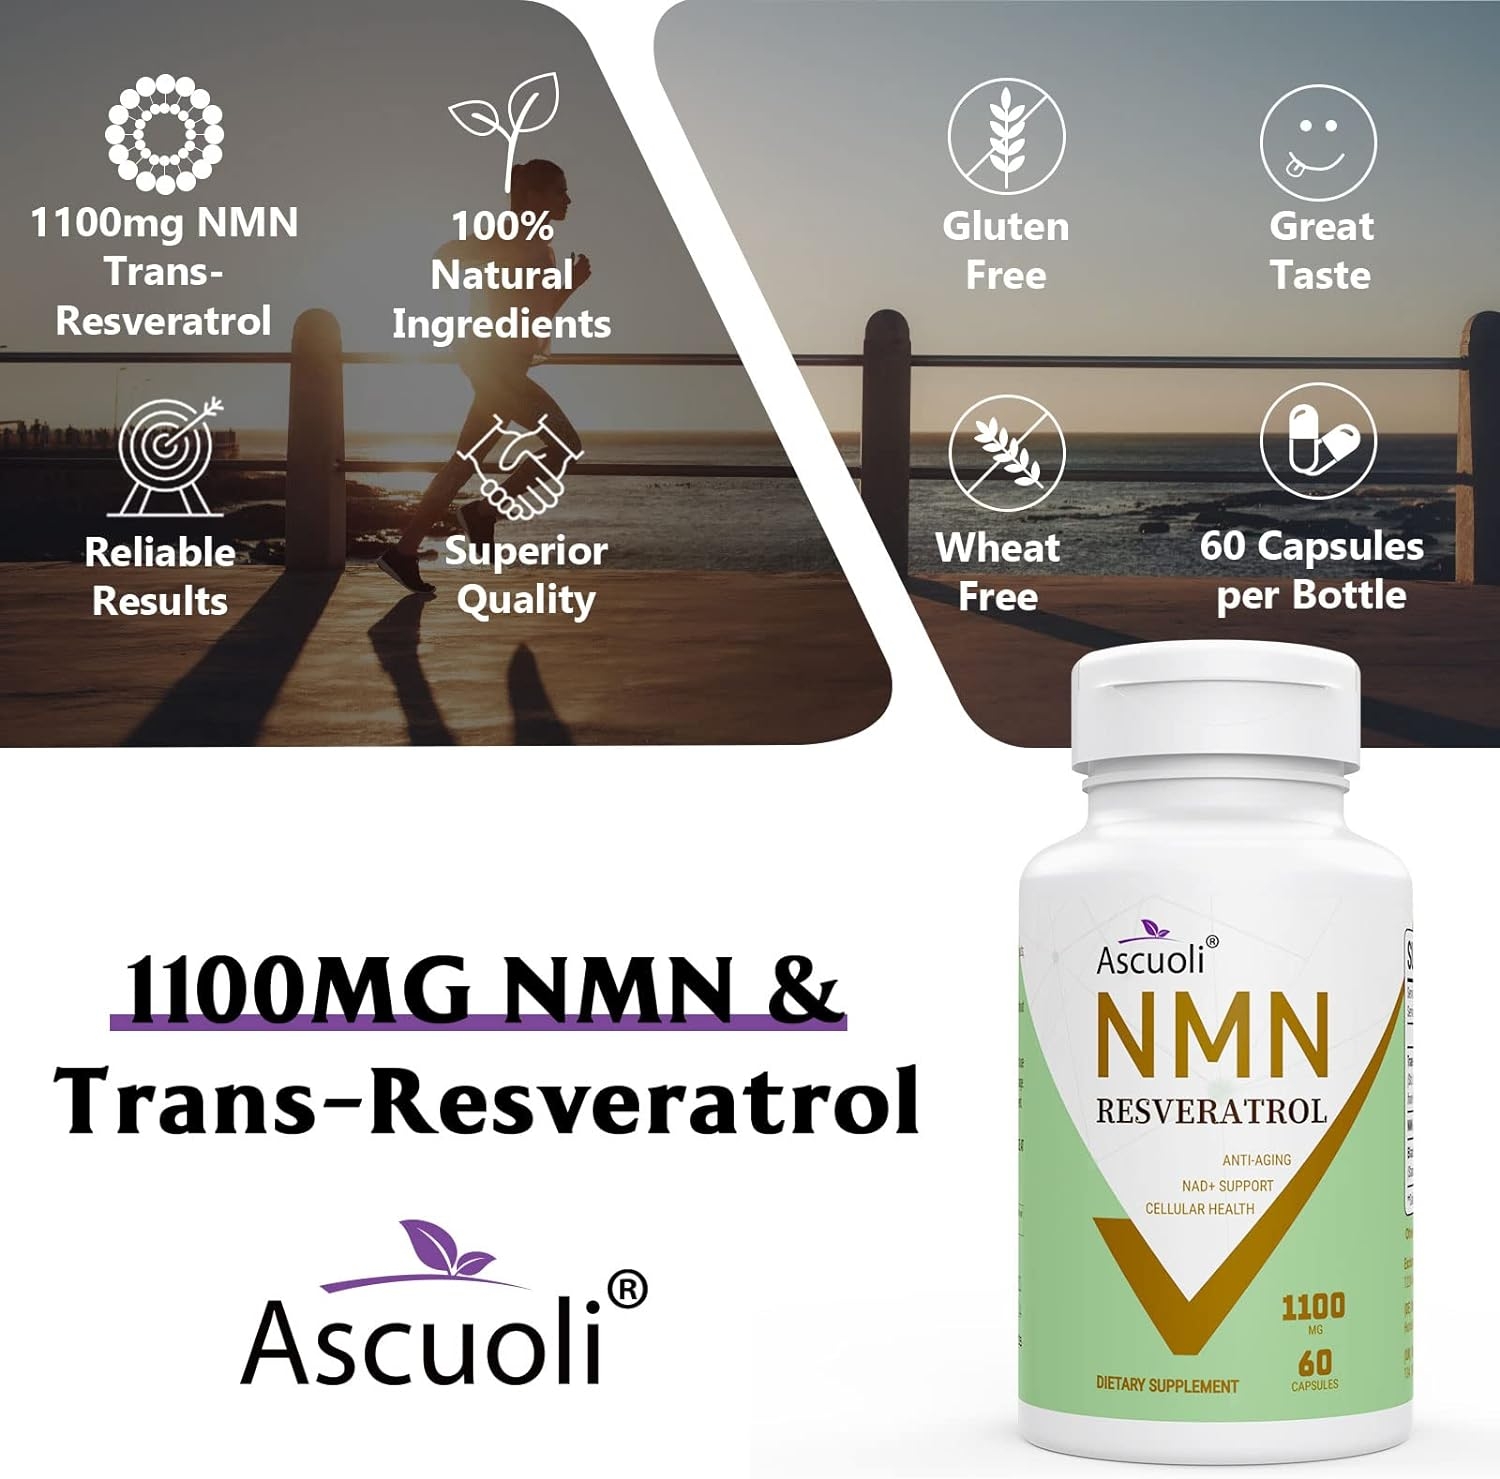 NMN + Trans-Resveratrol 99% Purity 1100mg Supplement, 3-IN -1 Advanced Formula 500mg NMN Nicotinamide Mononucleotide Boost NAD+, Anti-Aging, Powerful Antioxidant, Immune & Energy Support, 60 Capsules